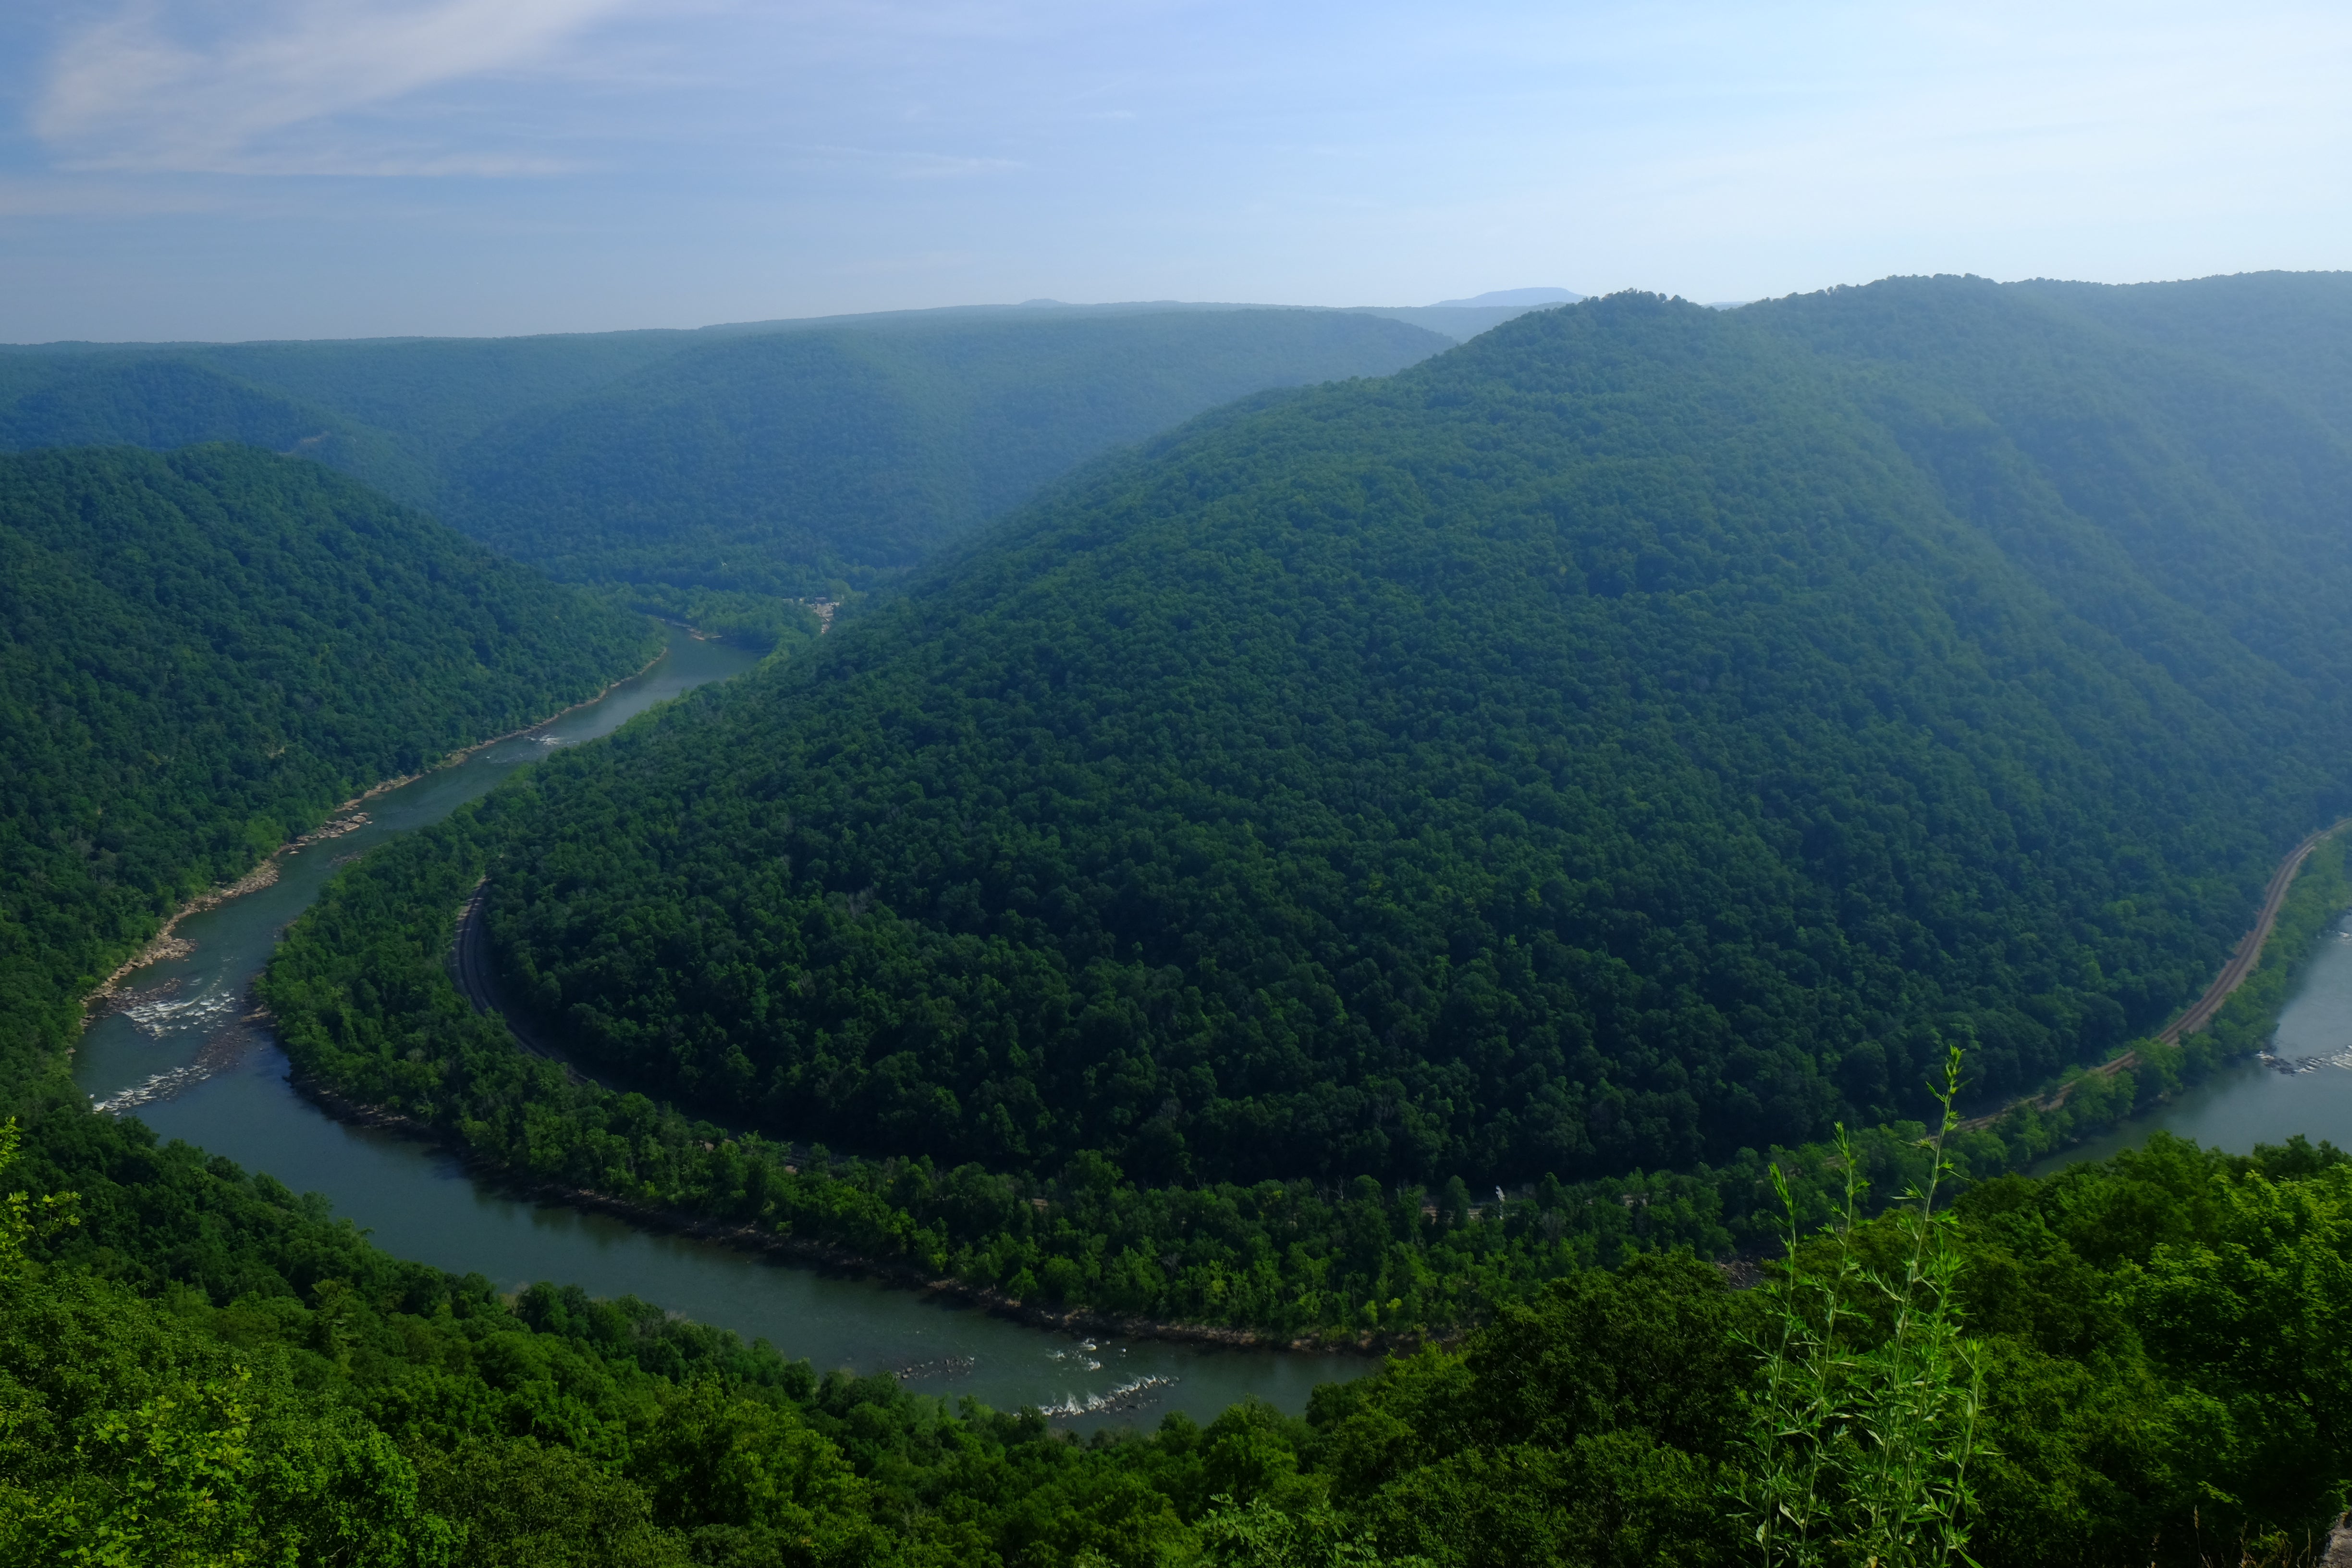 Camping in New River Gorge National River